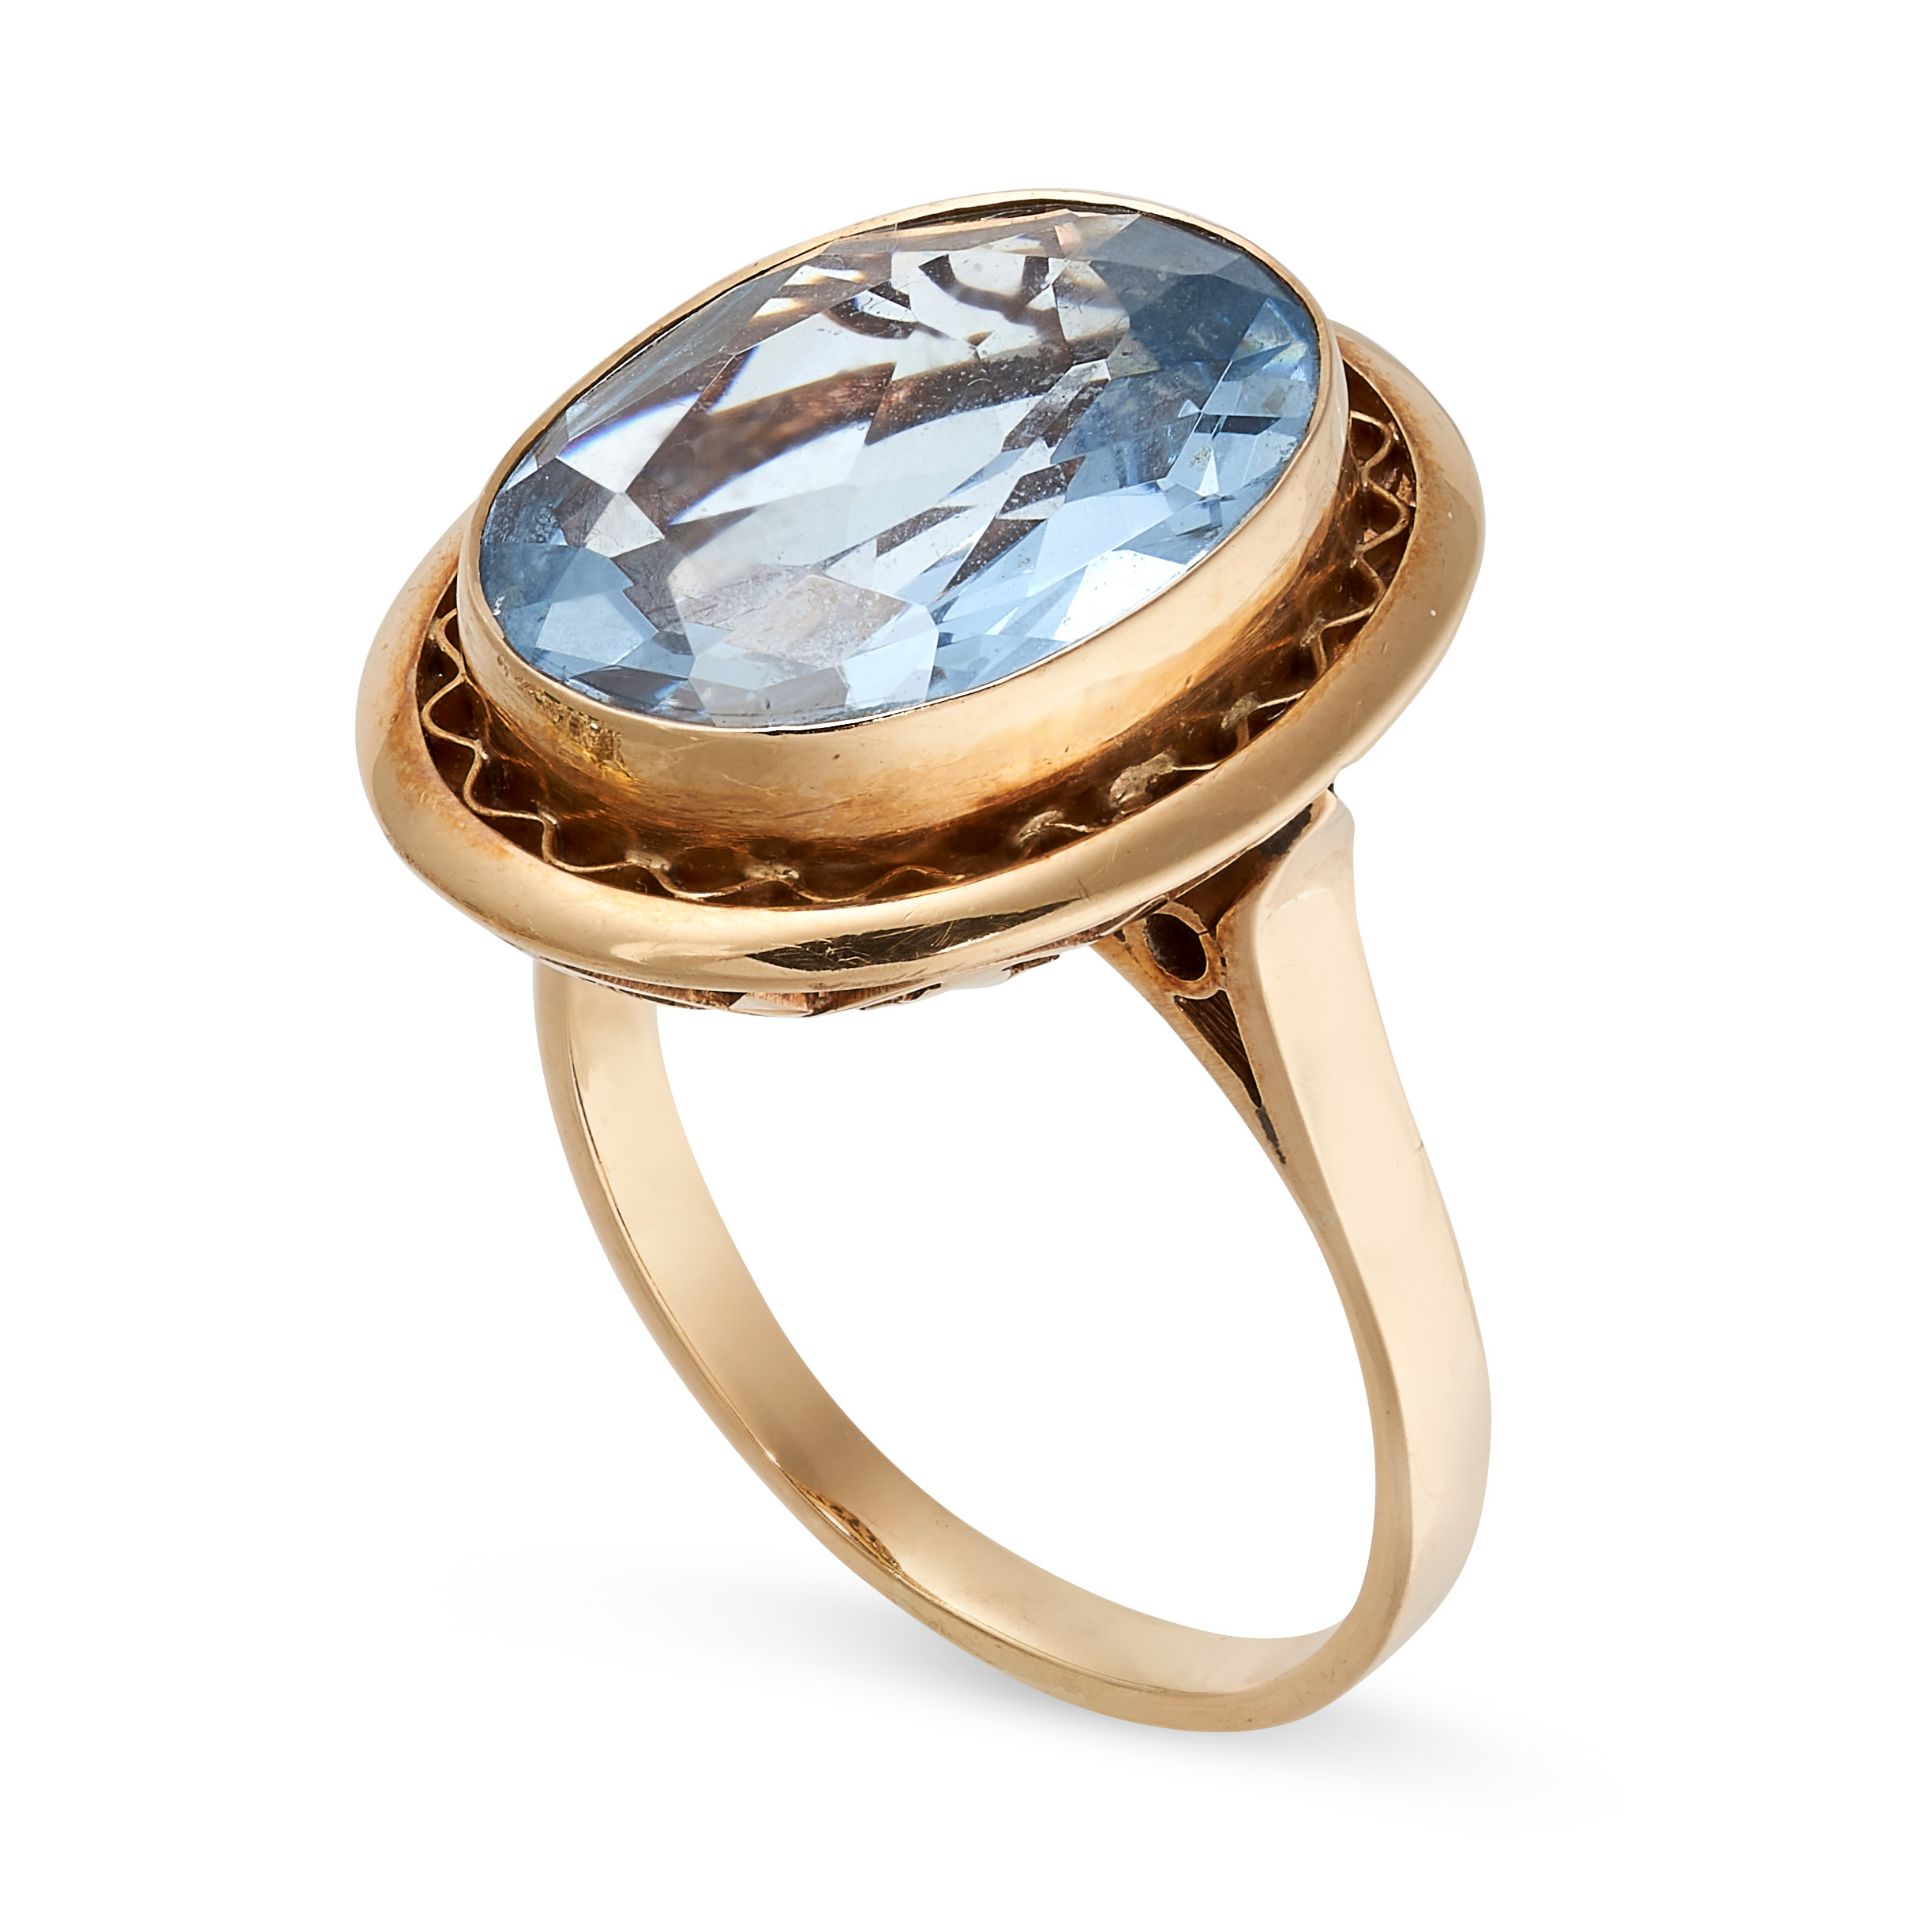 NO RESERVE - A SYNTHETIC BLUE SPINEL DRESS RING in yellow gold, set with an oval synthetic spinel... - Image 2 of 2